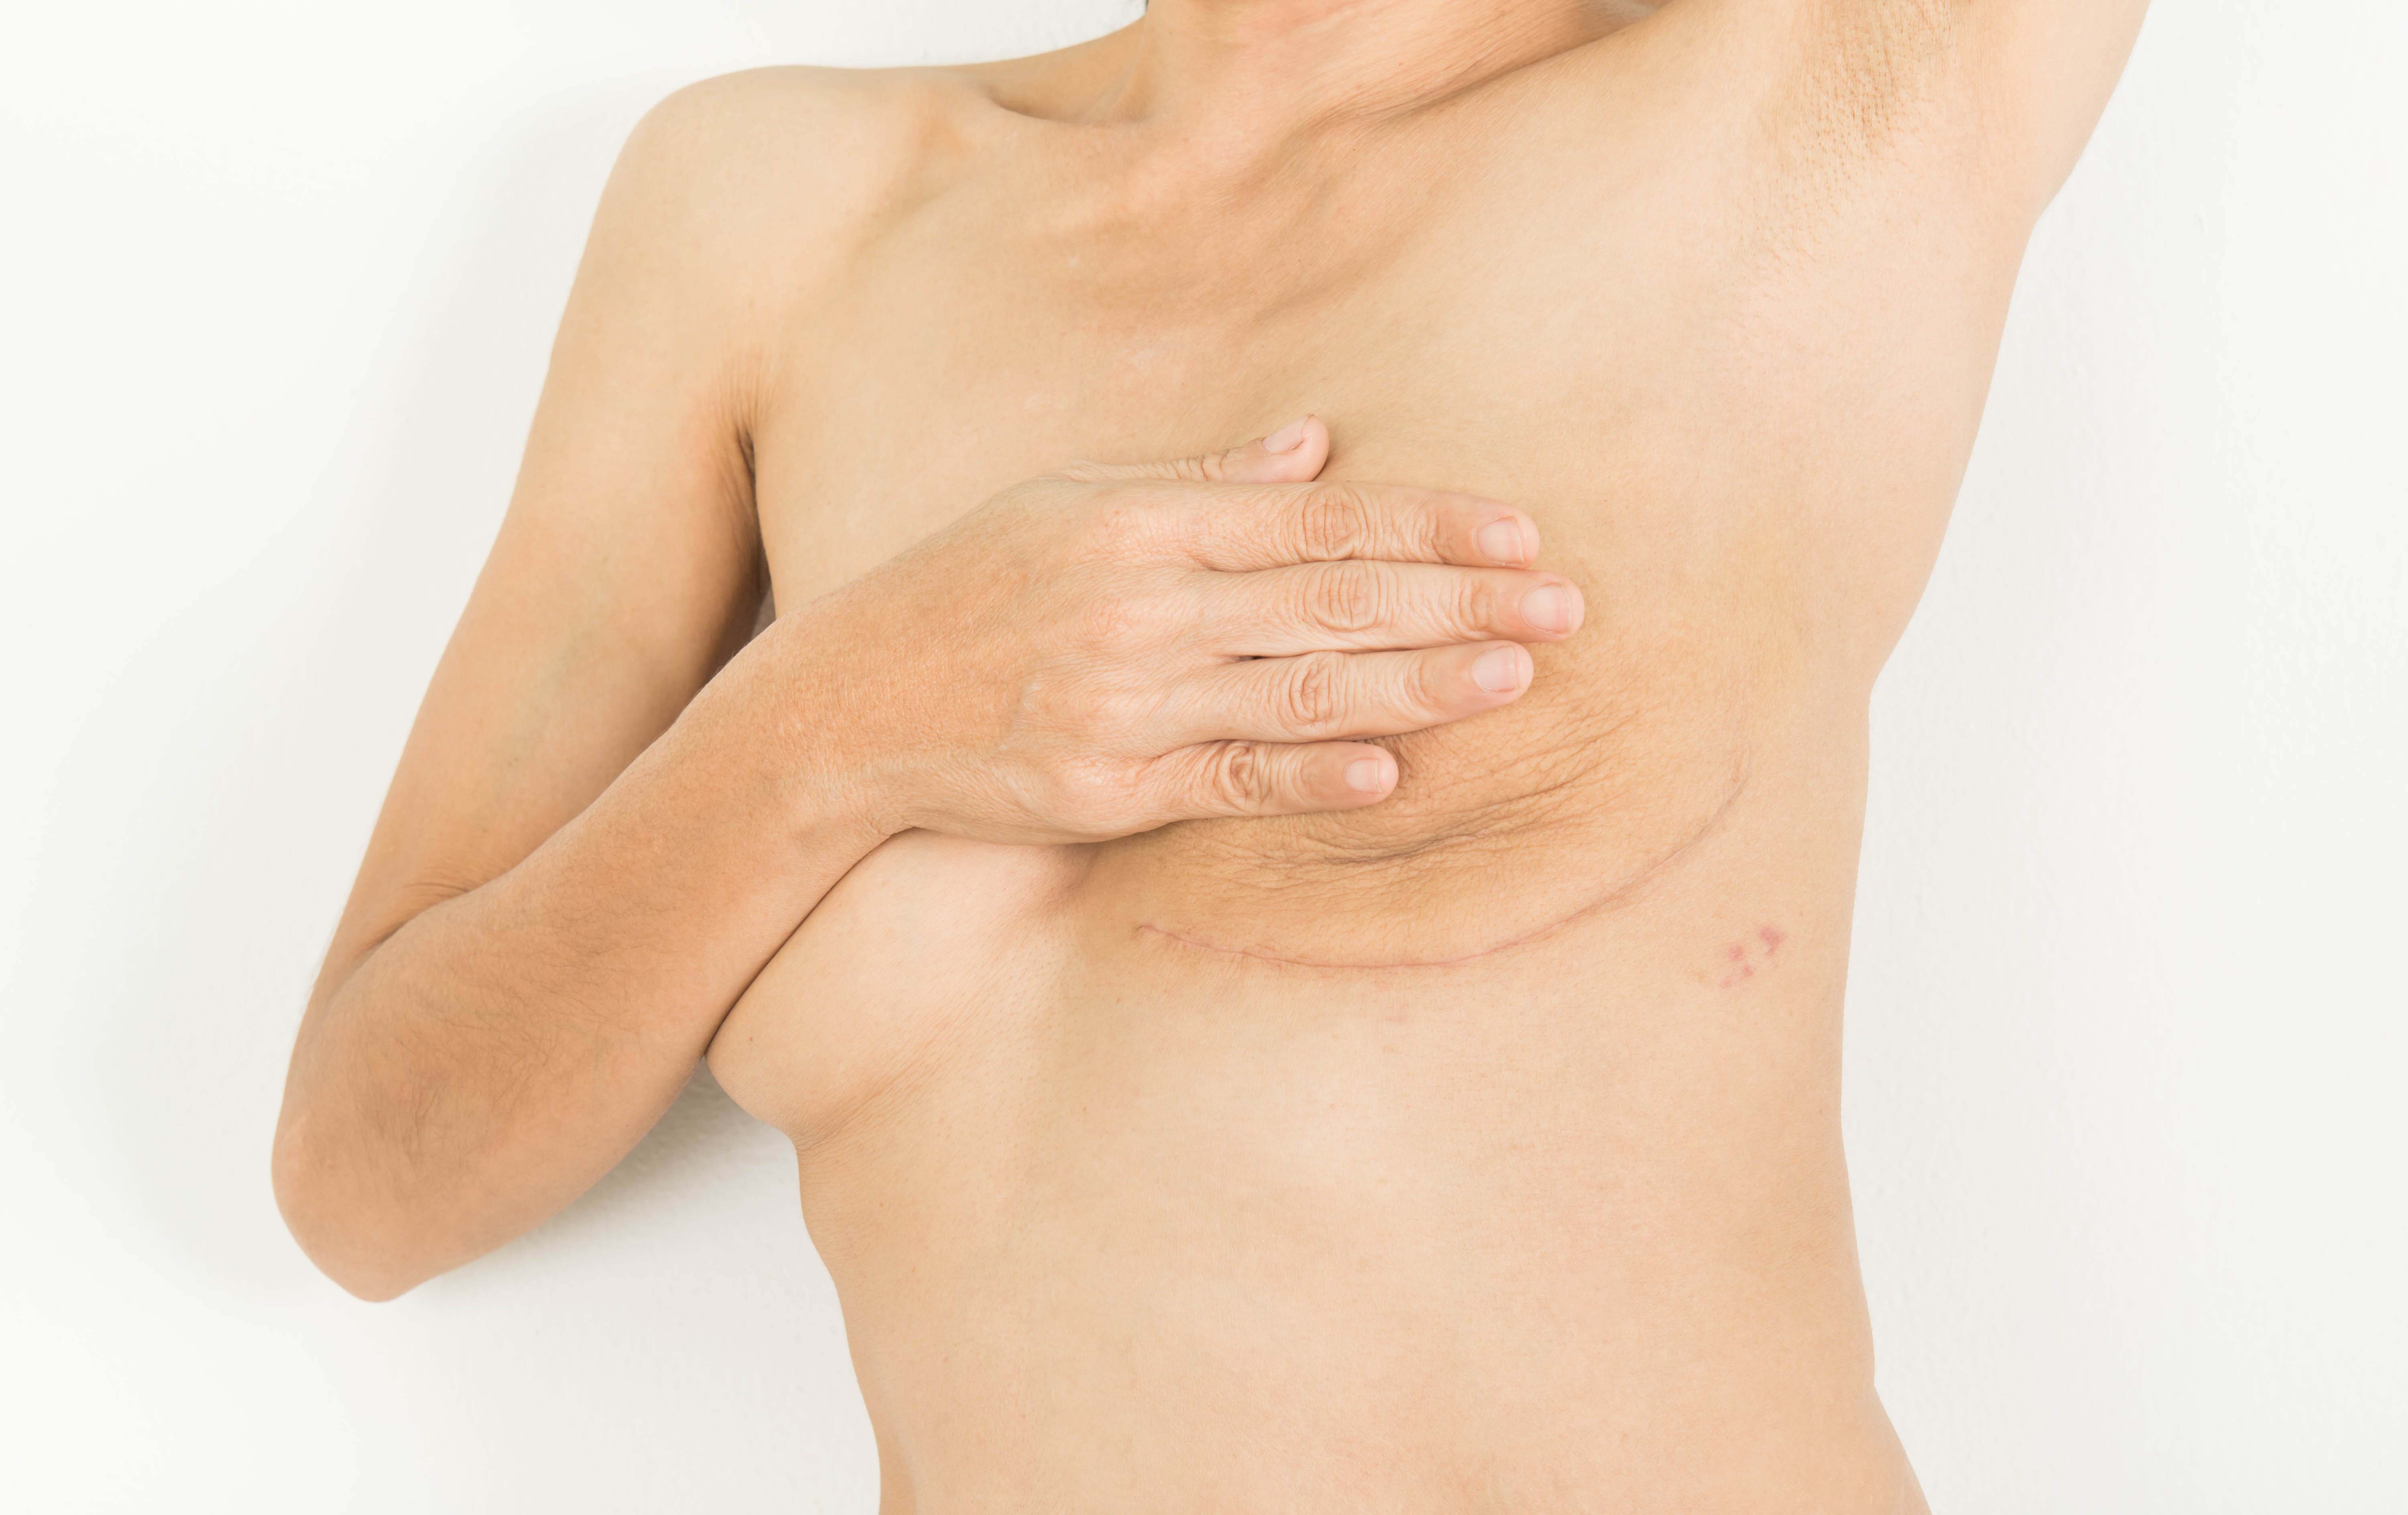 The movement of going flat after a bilateral mastectomy.